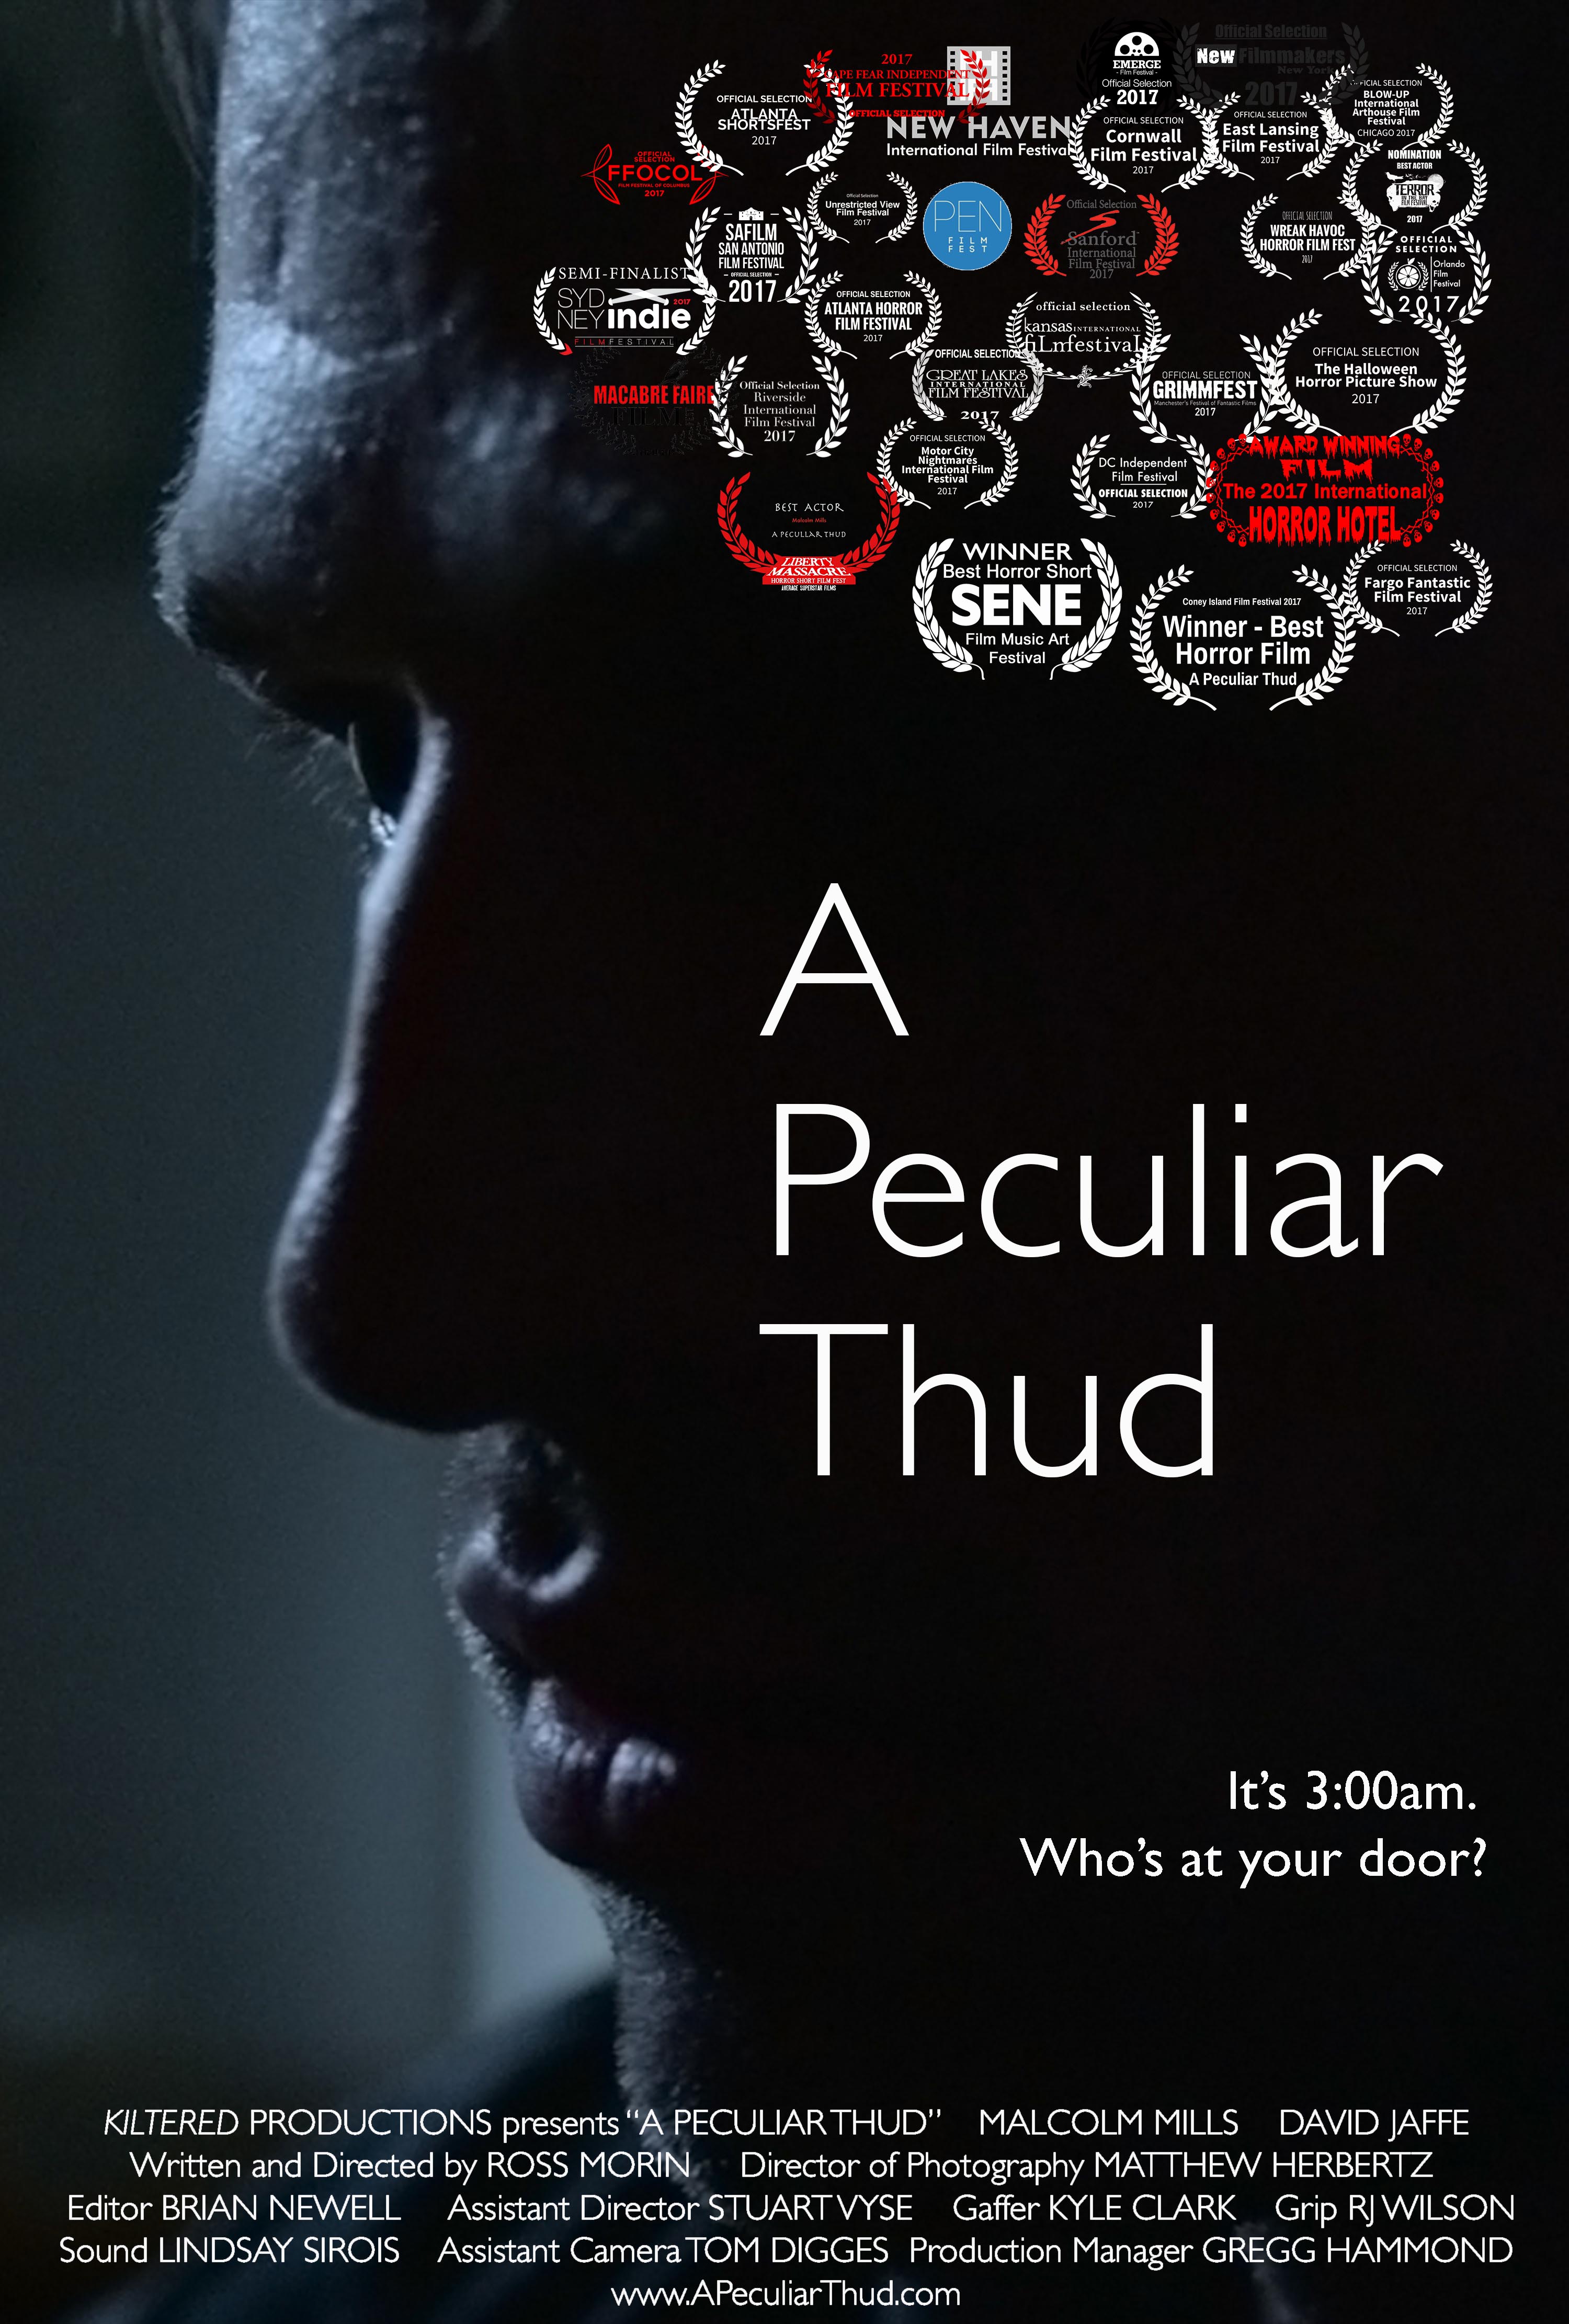 Poster for Ross Morin's film, A Peculiar Thud